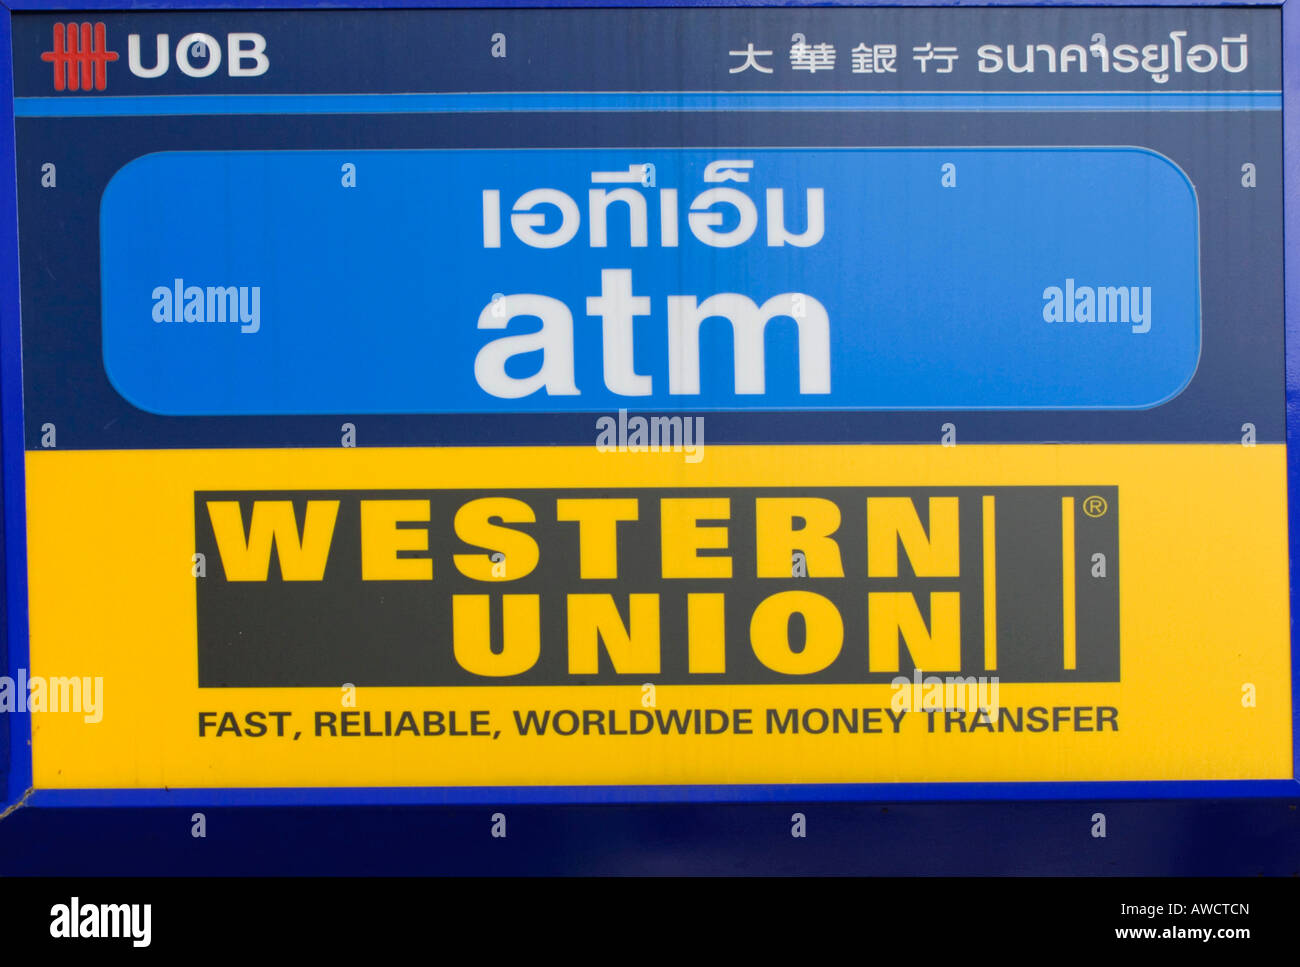 Thailand Bank High Resolution Stock Photography and Images - Alamy